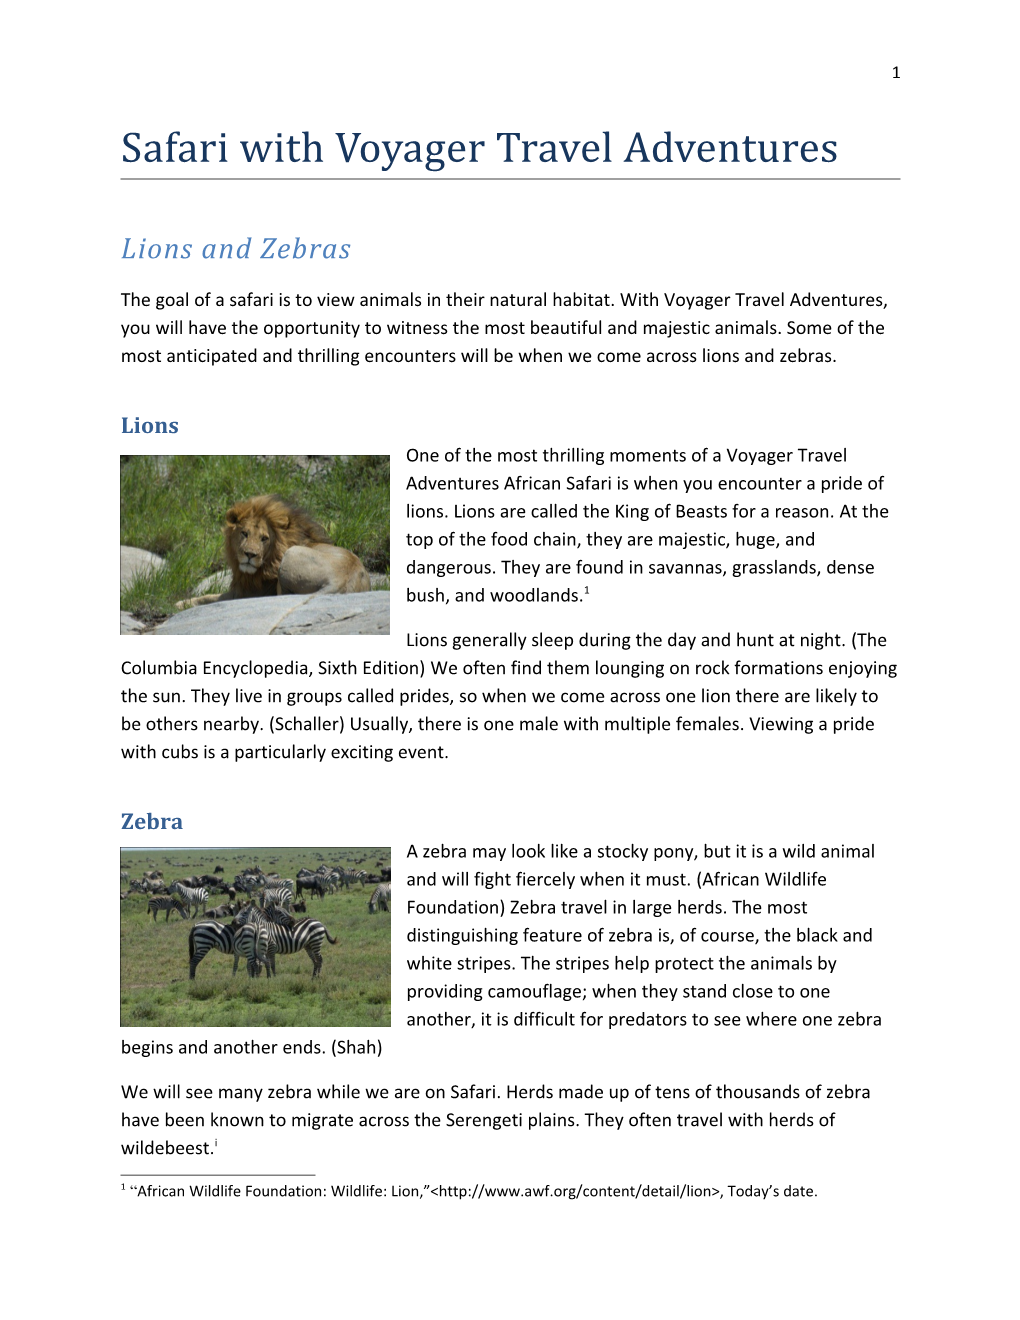 Safari with Voyager Travel Adventures